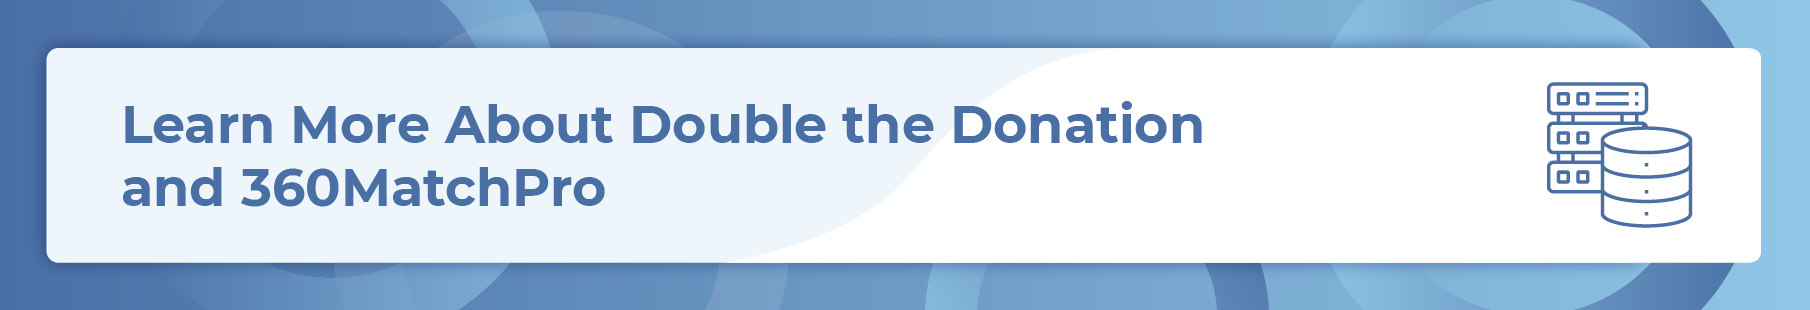 Learn about the top databases of CSR programs: Double the Donation and 360MatchPro.